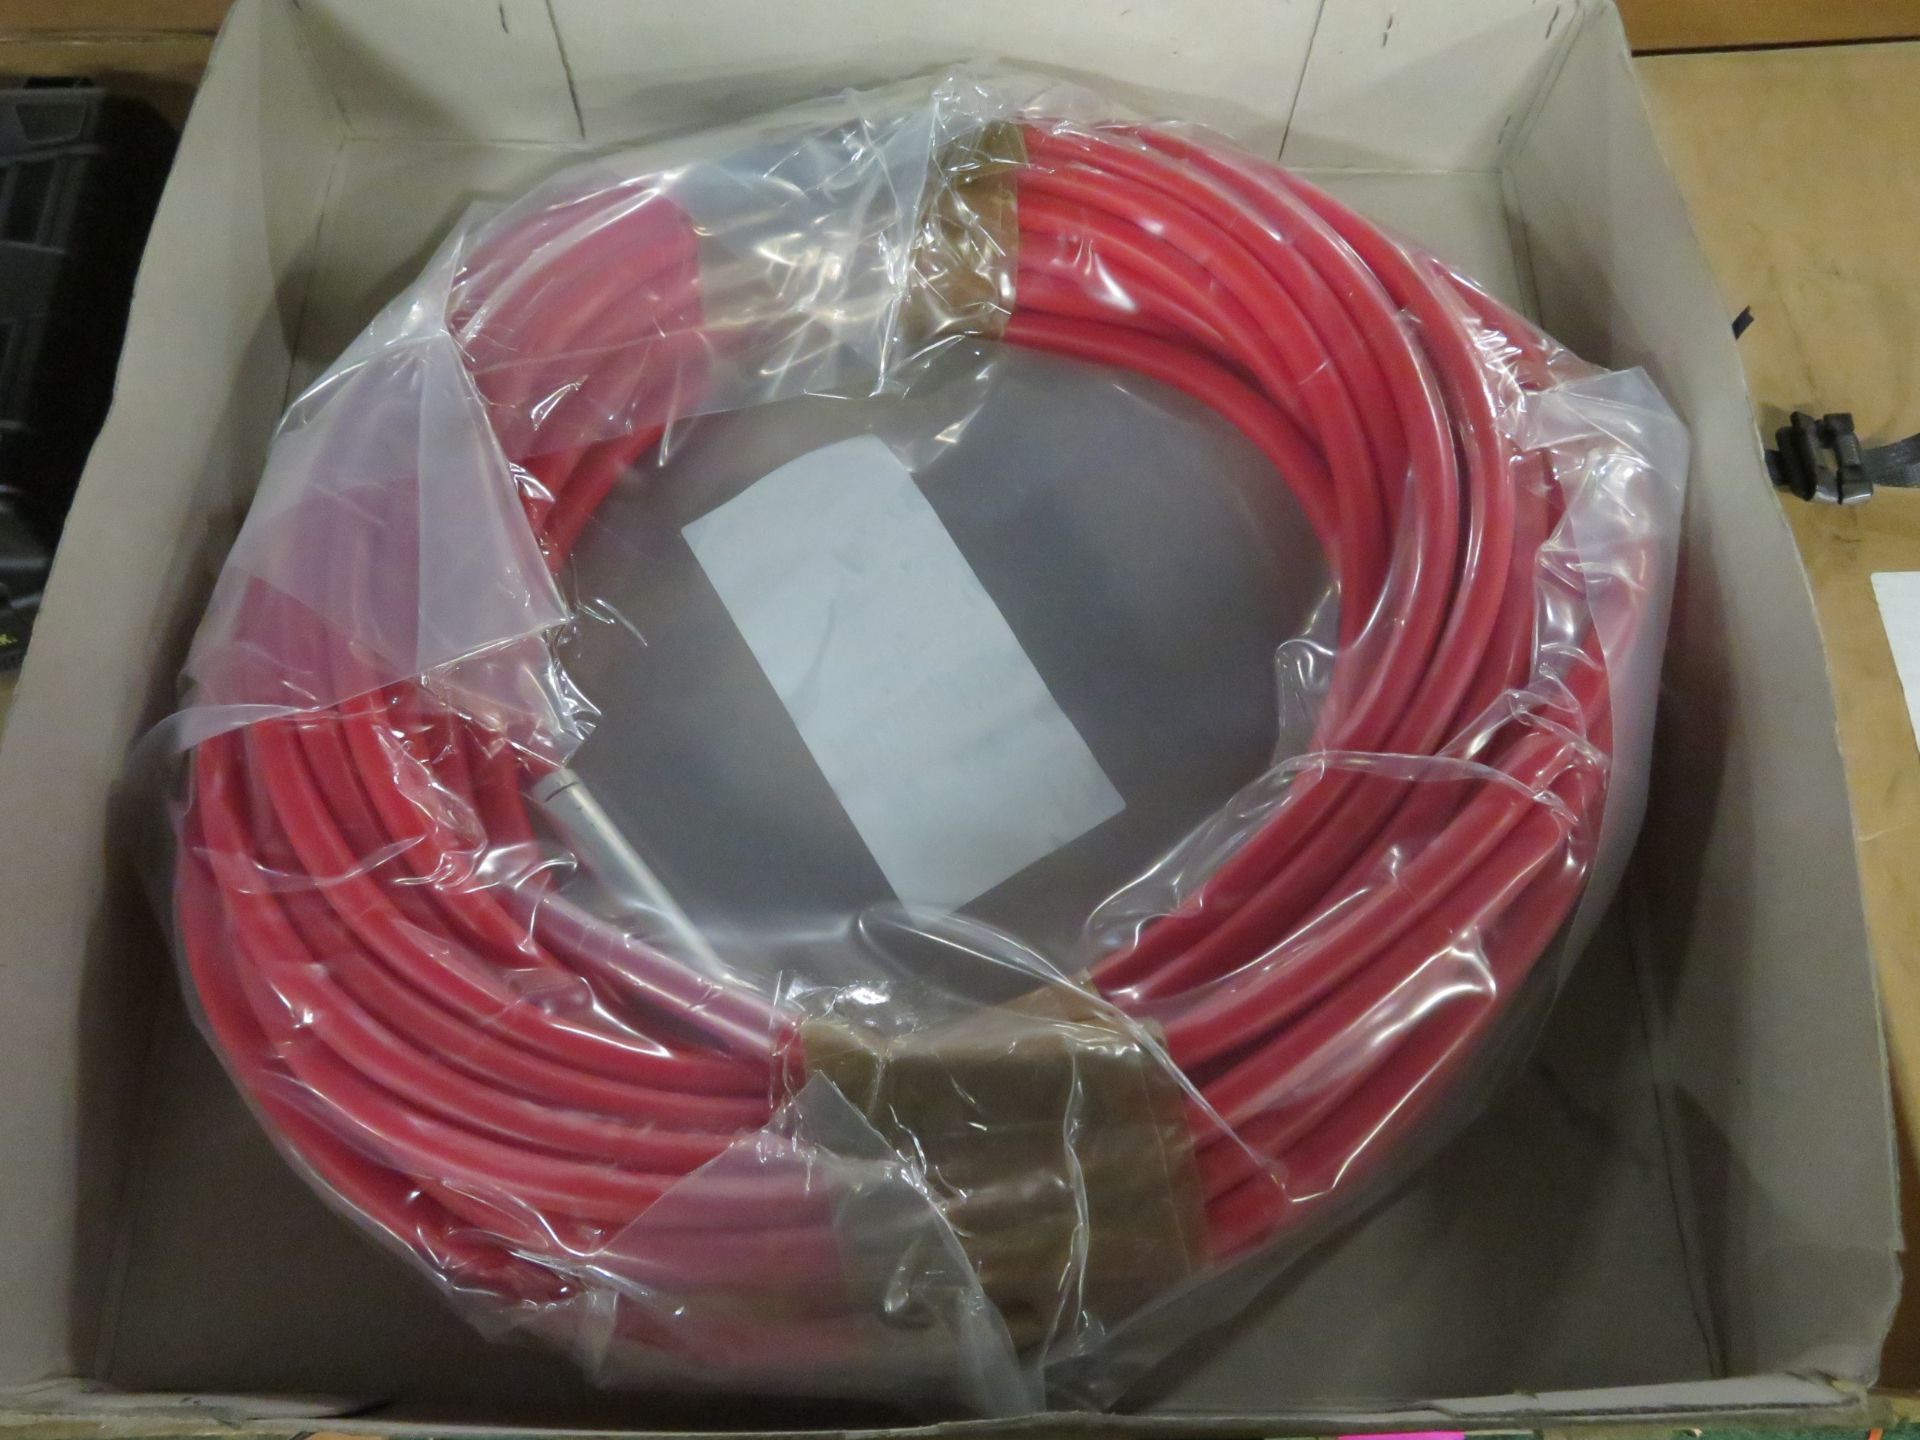 42x Hoses Nonmetallic Red In a Box - Image 3 of 4